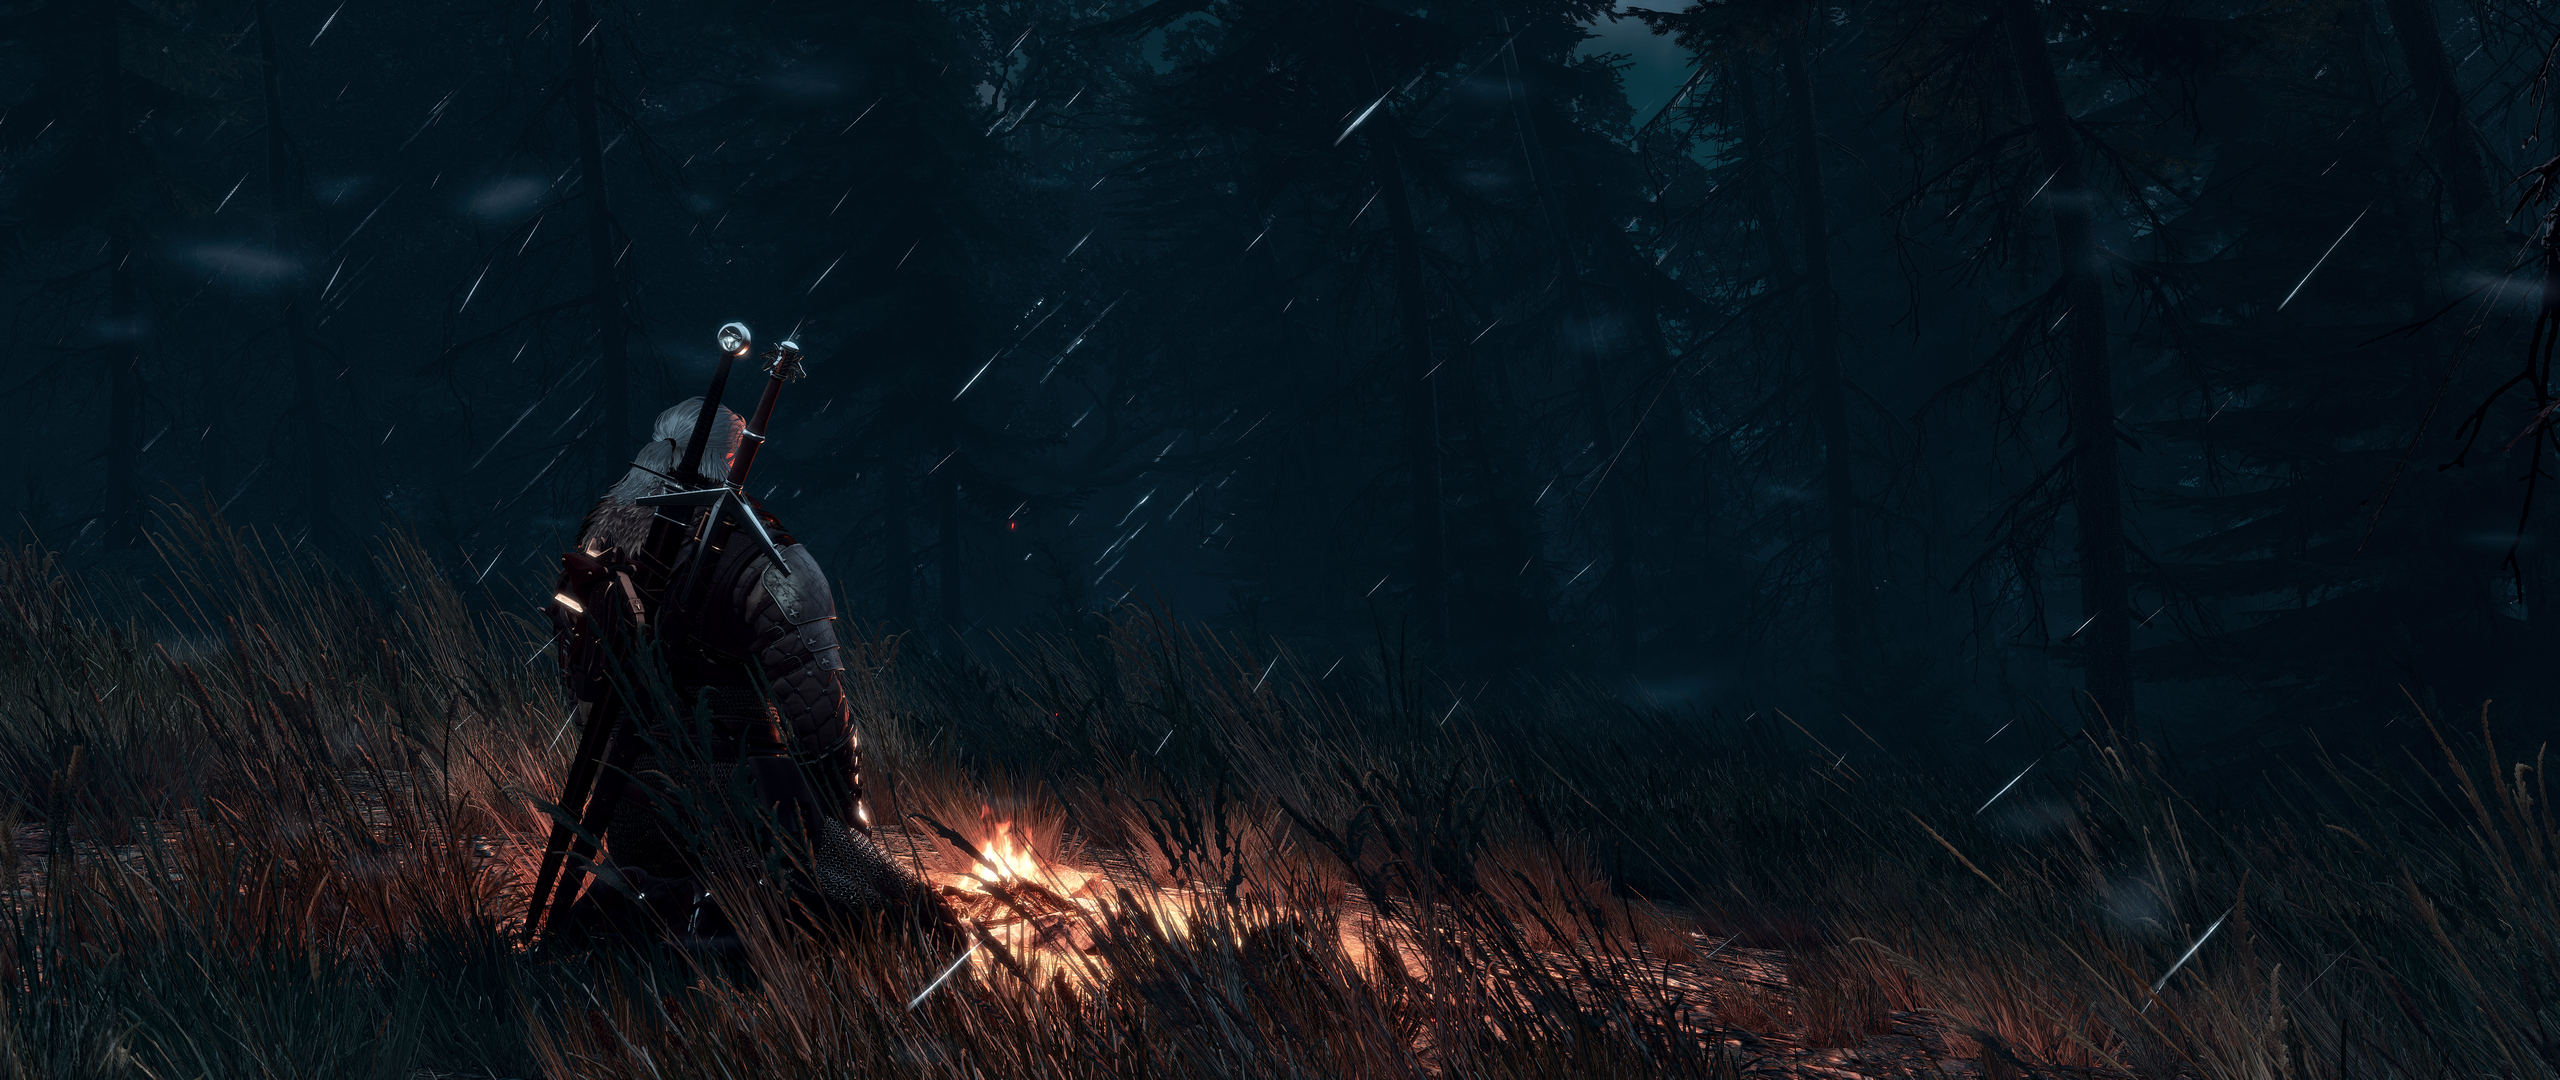 Hd Wallpaper - The Witcher , HD Wallpaper & Backgrounds